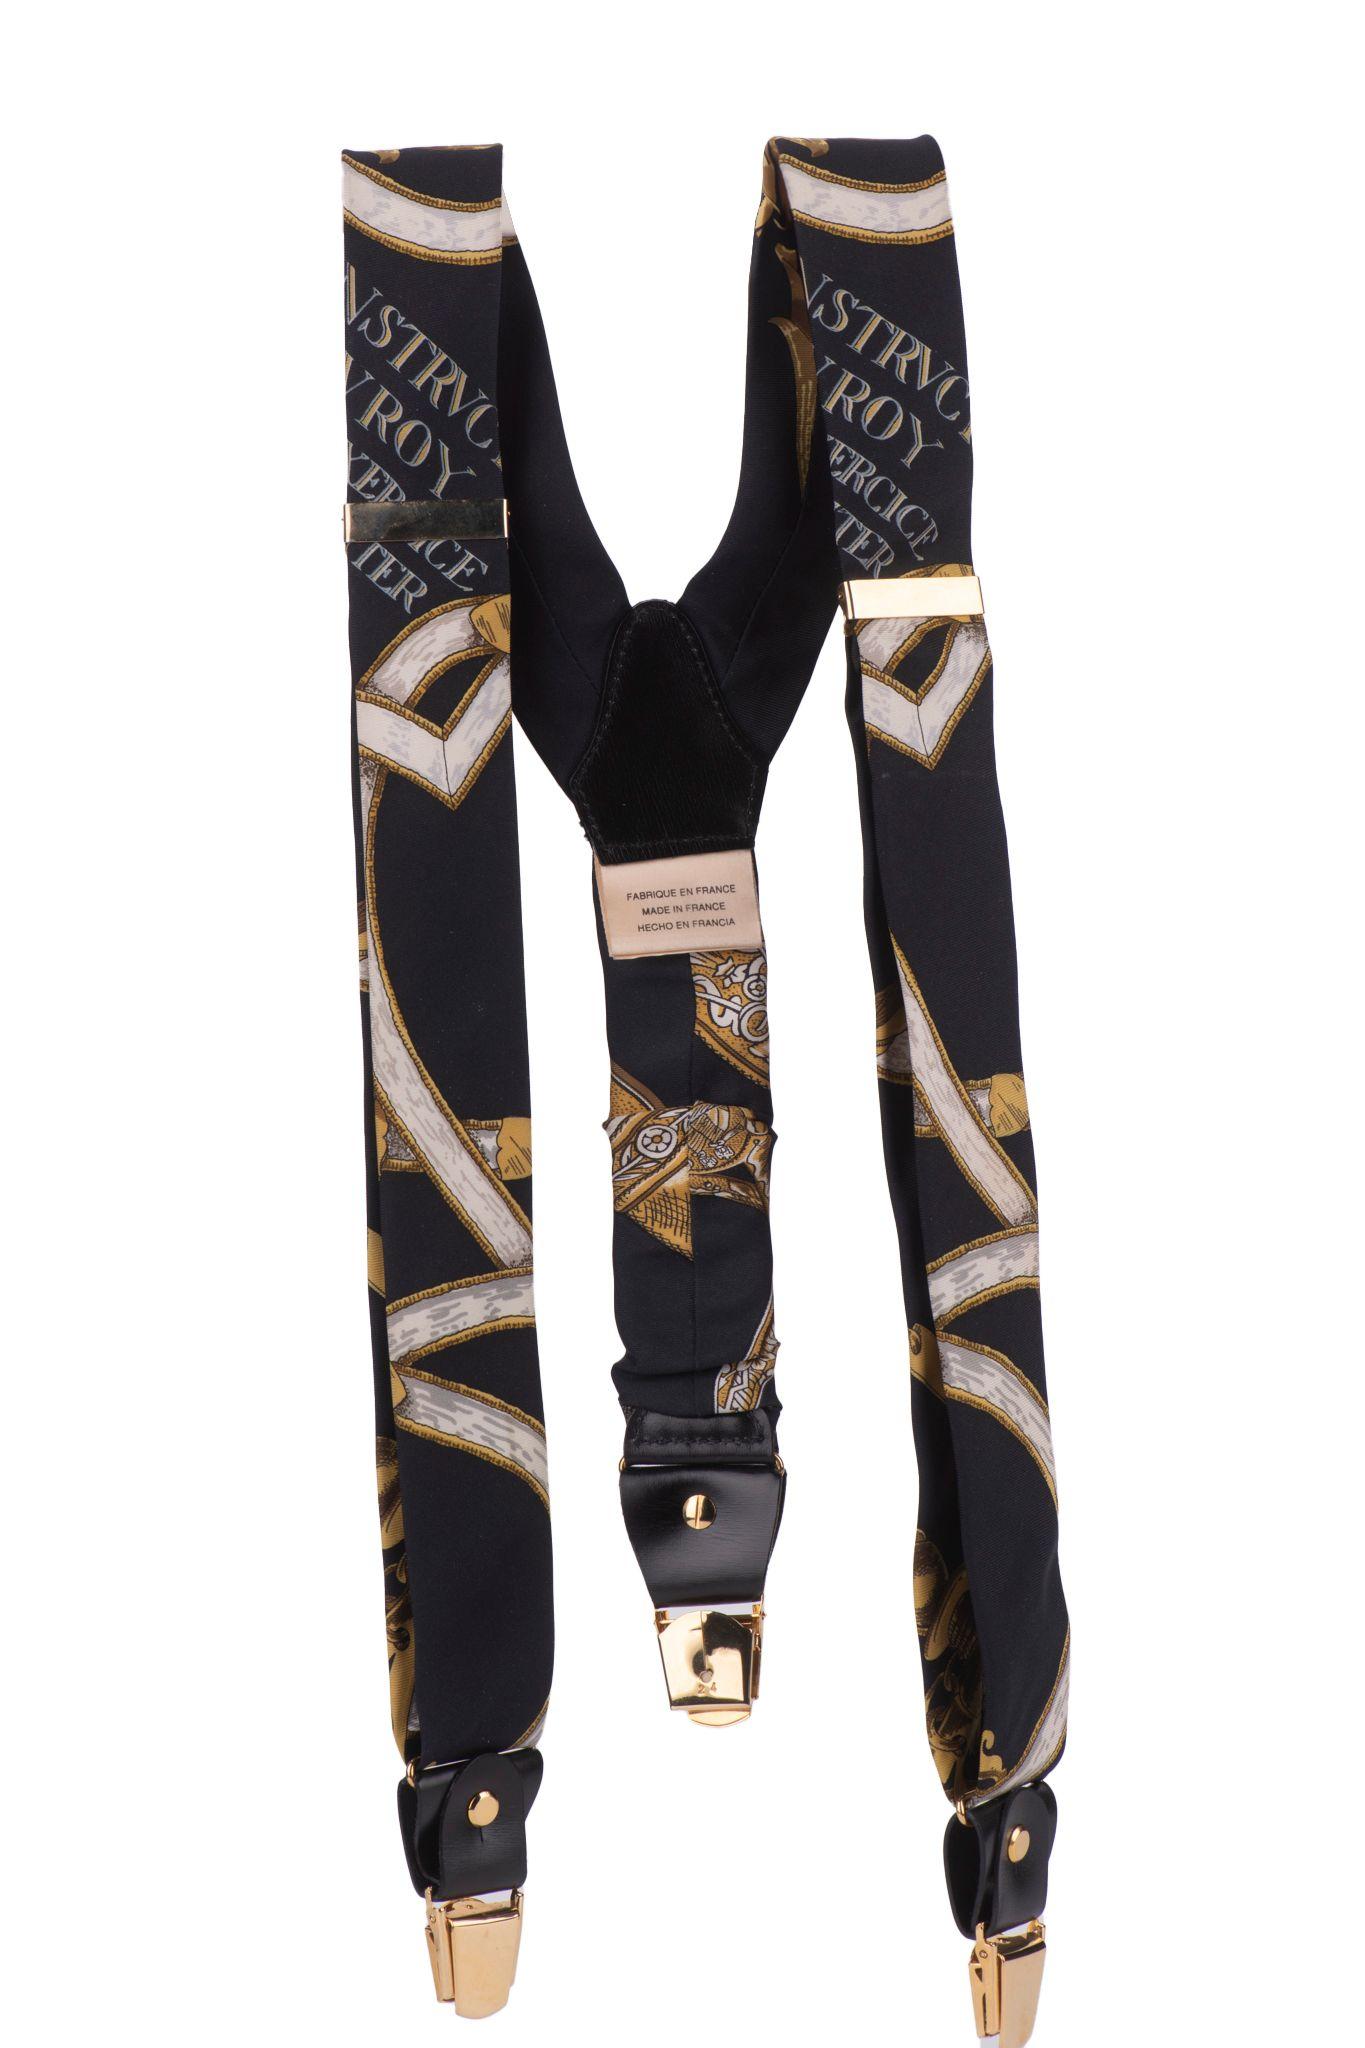 Hermès rare and collectible vintage black and gold silk suspenders. Adjustable length, can fit multiple sizes.
Come with original box.